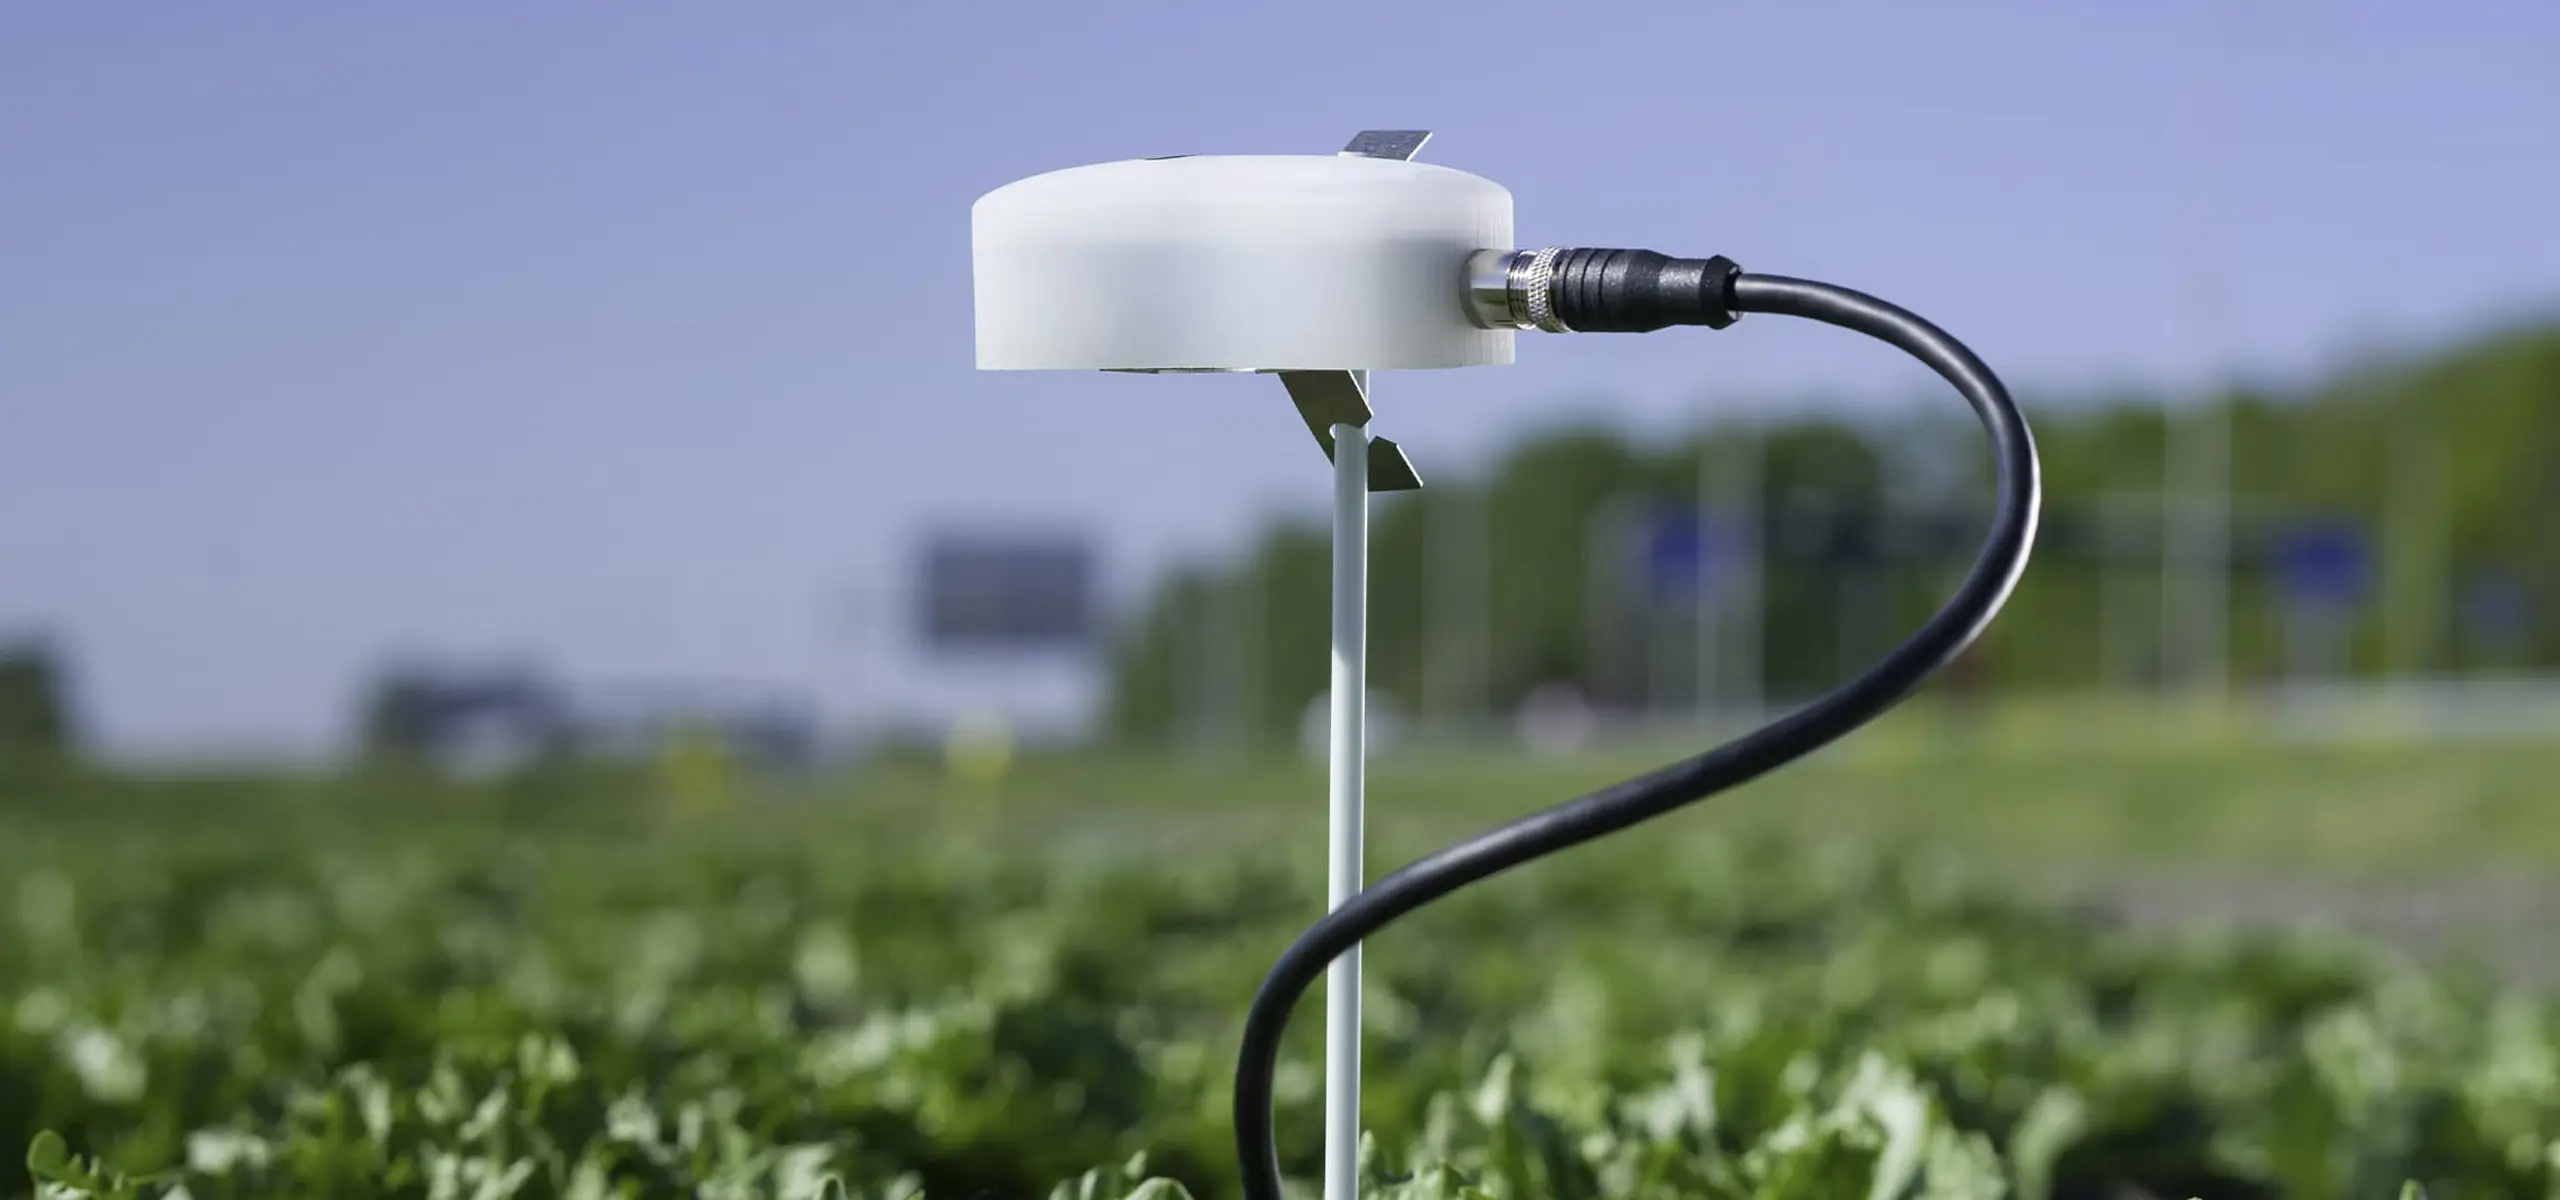 Firefly agricultural sensors designed by Groen & Boothman Amsterdam